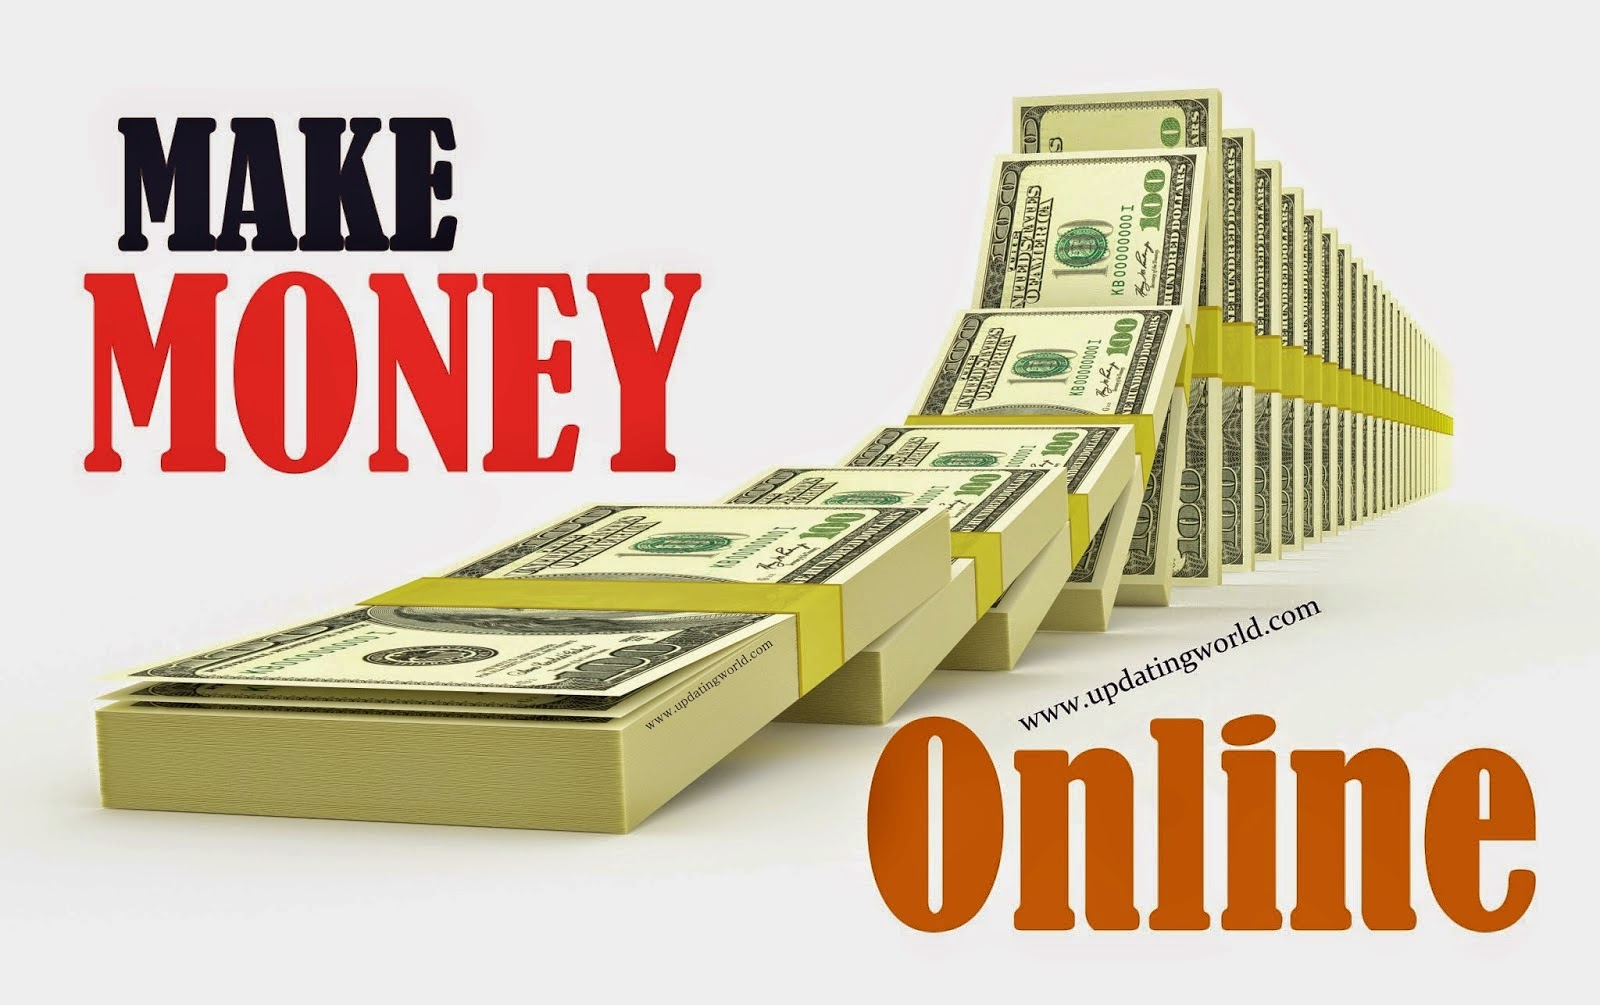 I will show you easy way to make money online fast system fo